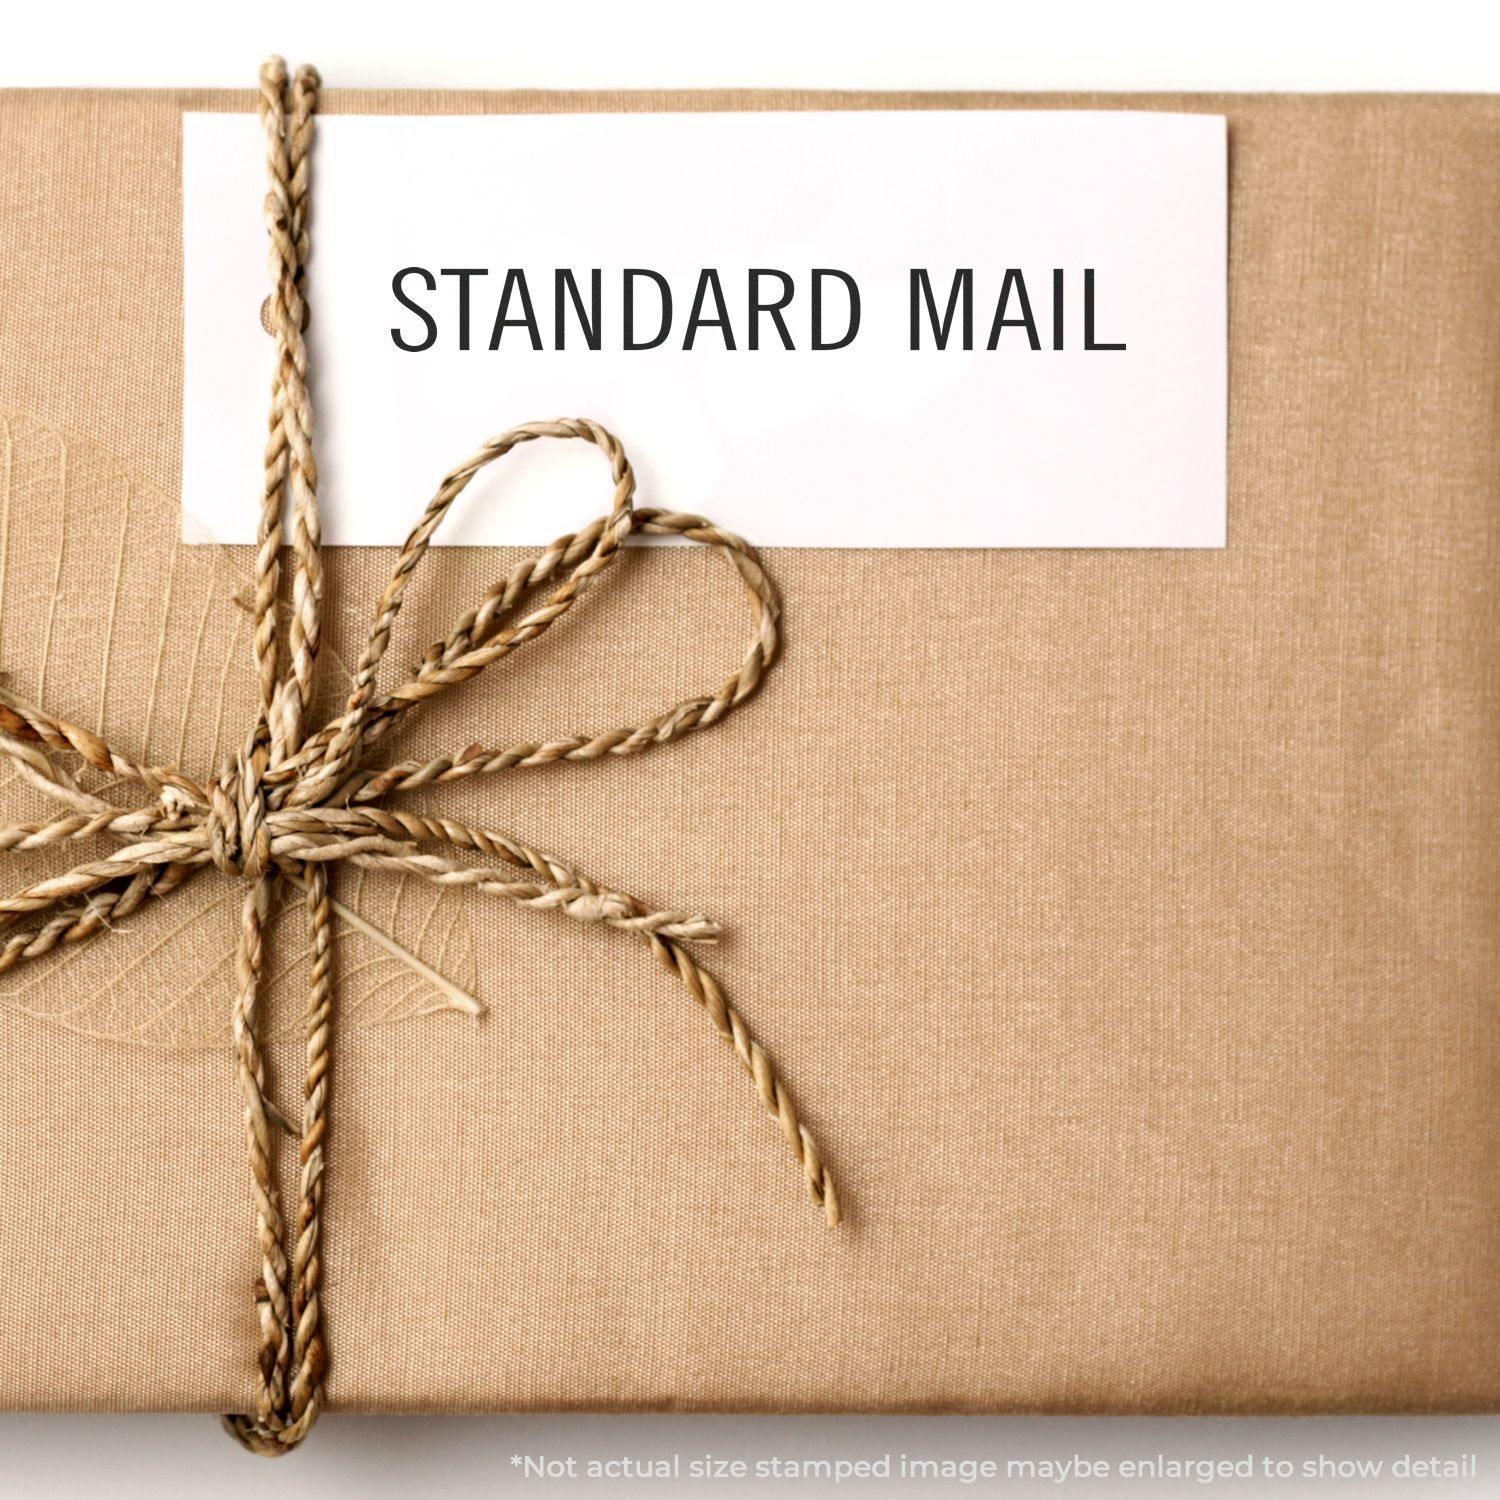 A self-inking stamp with a stamped image showing how the text "STANDARD MAIL" in a large font is displayed by it after stamping.